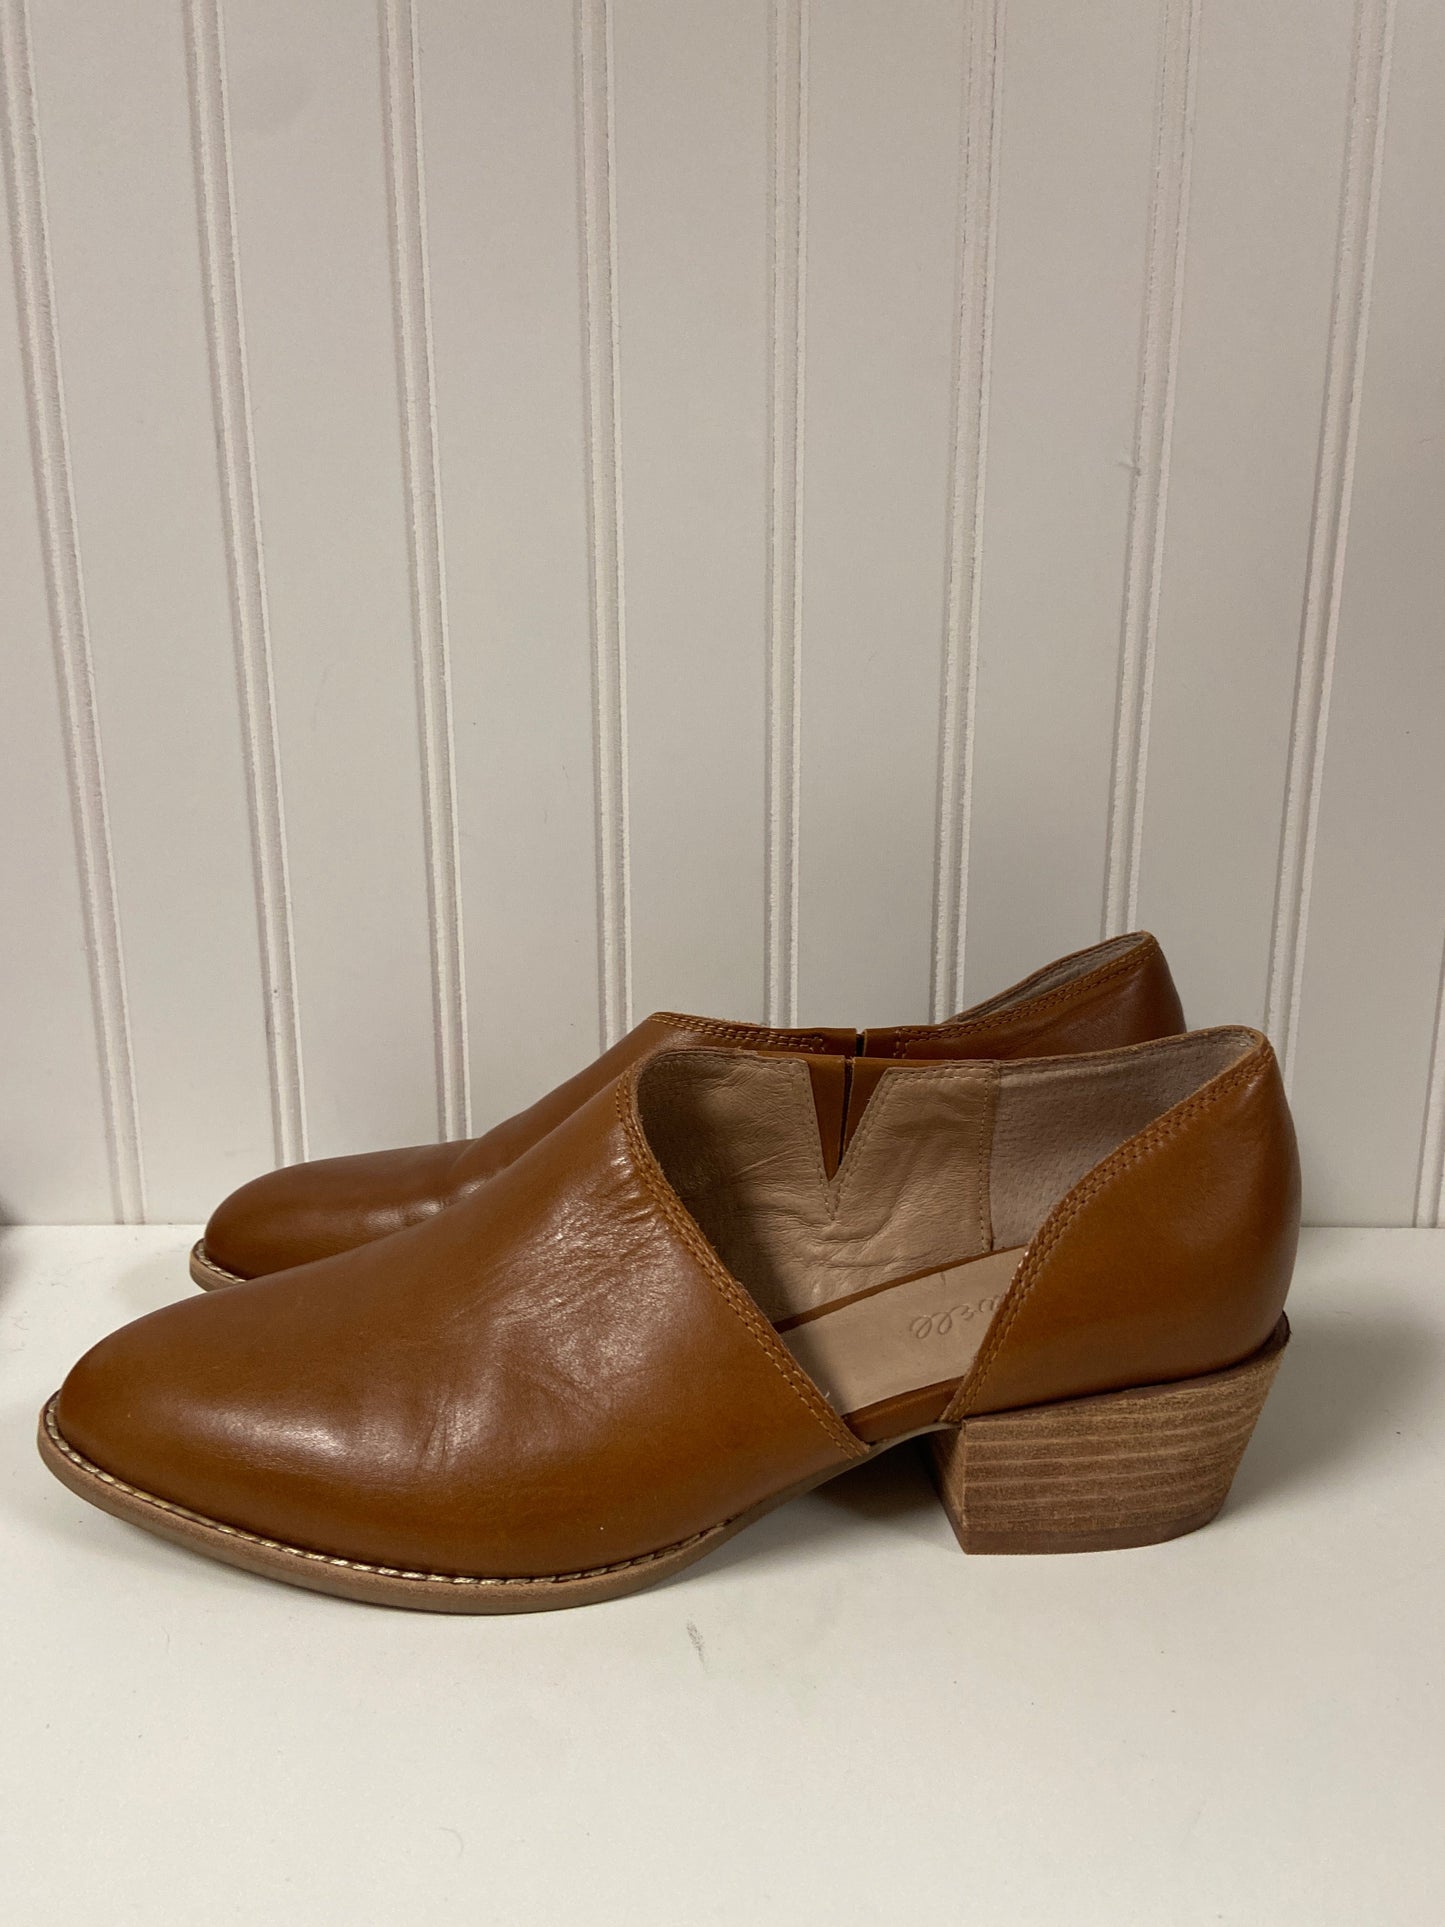 Brown Shoes Flats Madewell, Size 8.5